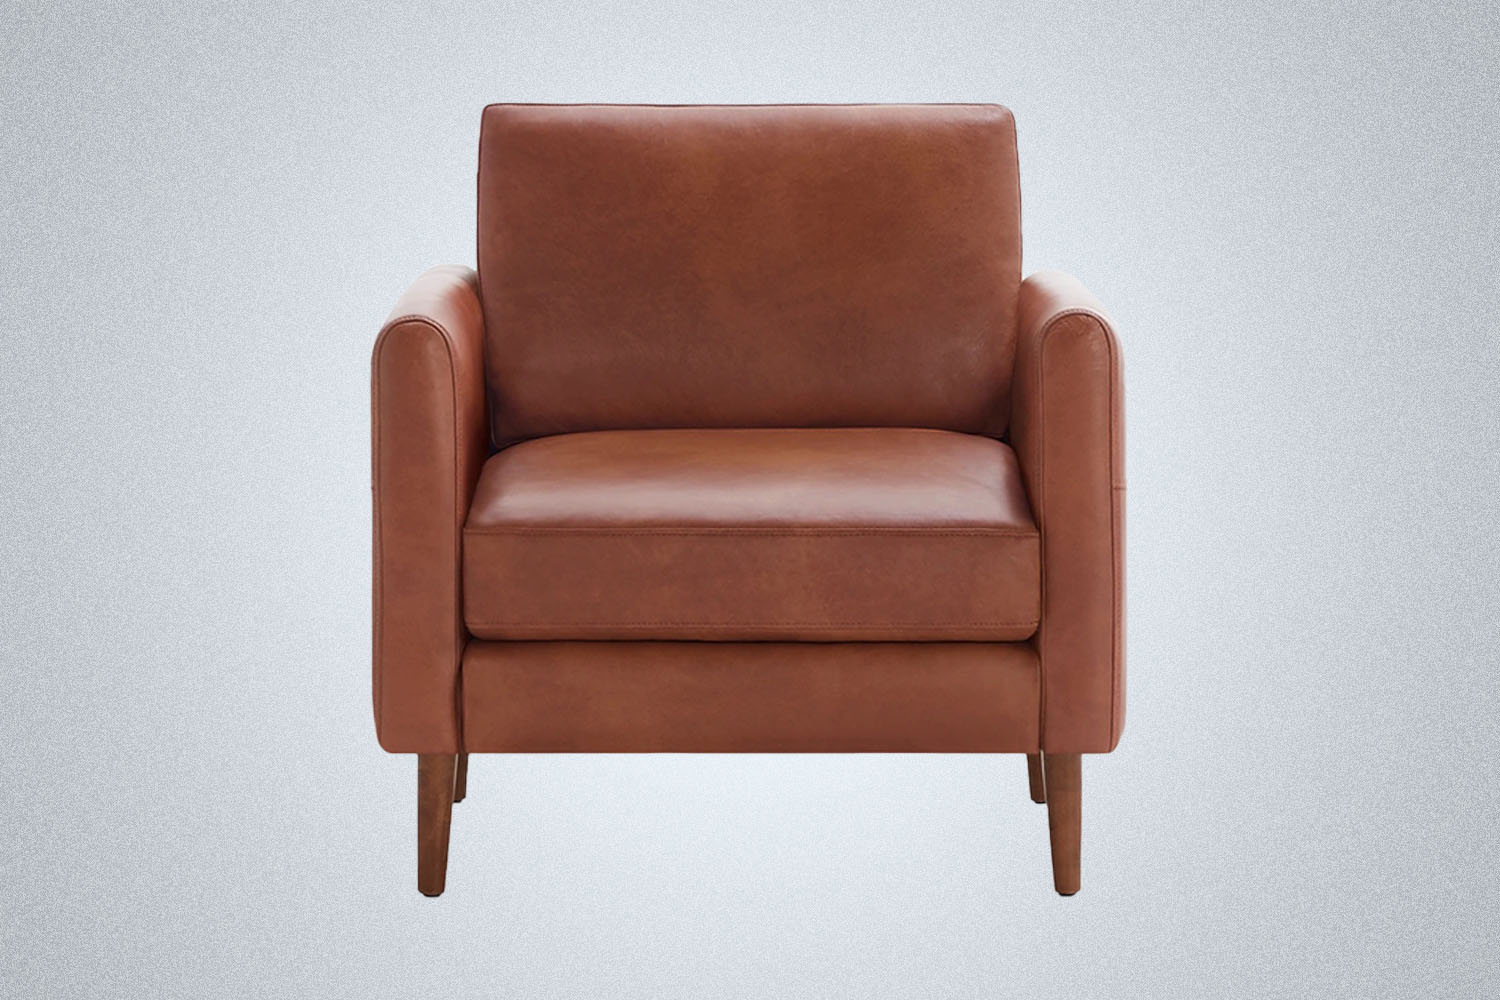 a square leather armchair from Burrow on a grey background